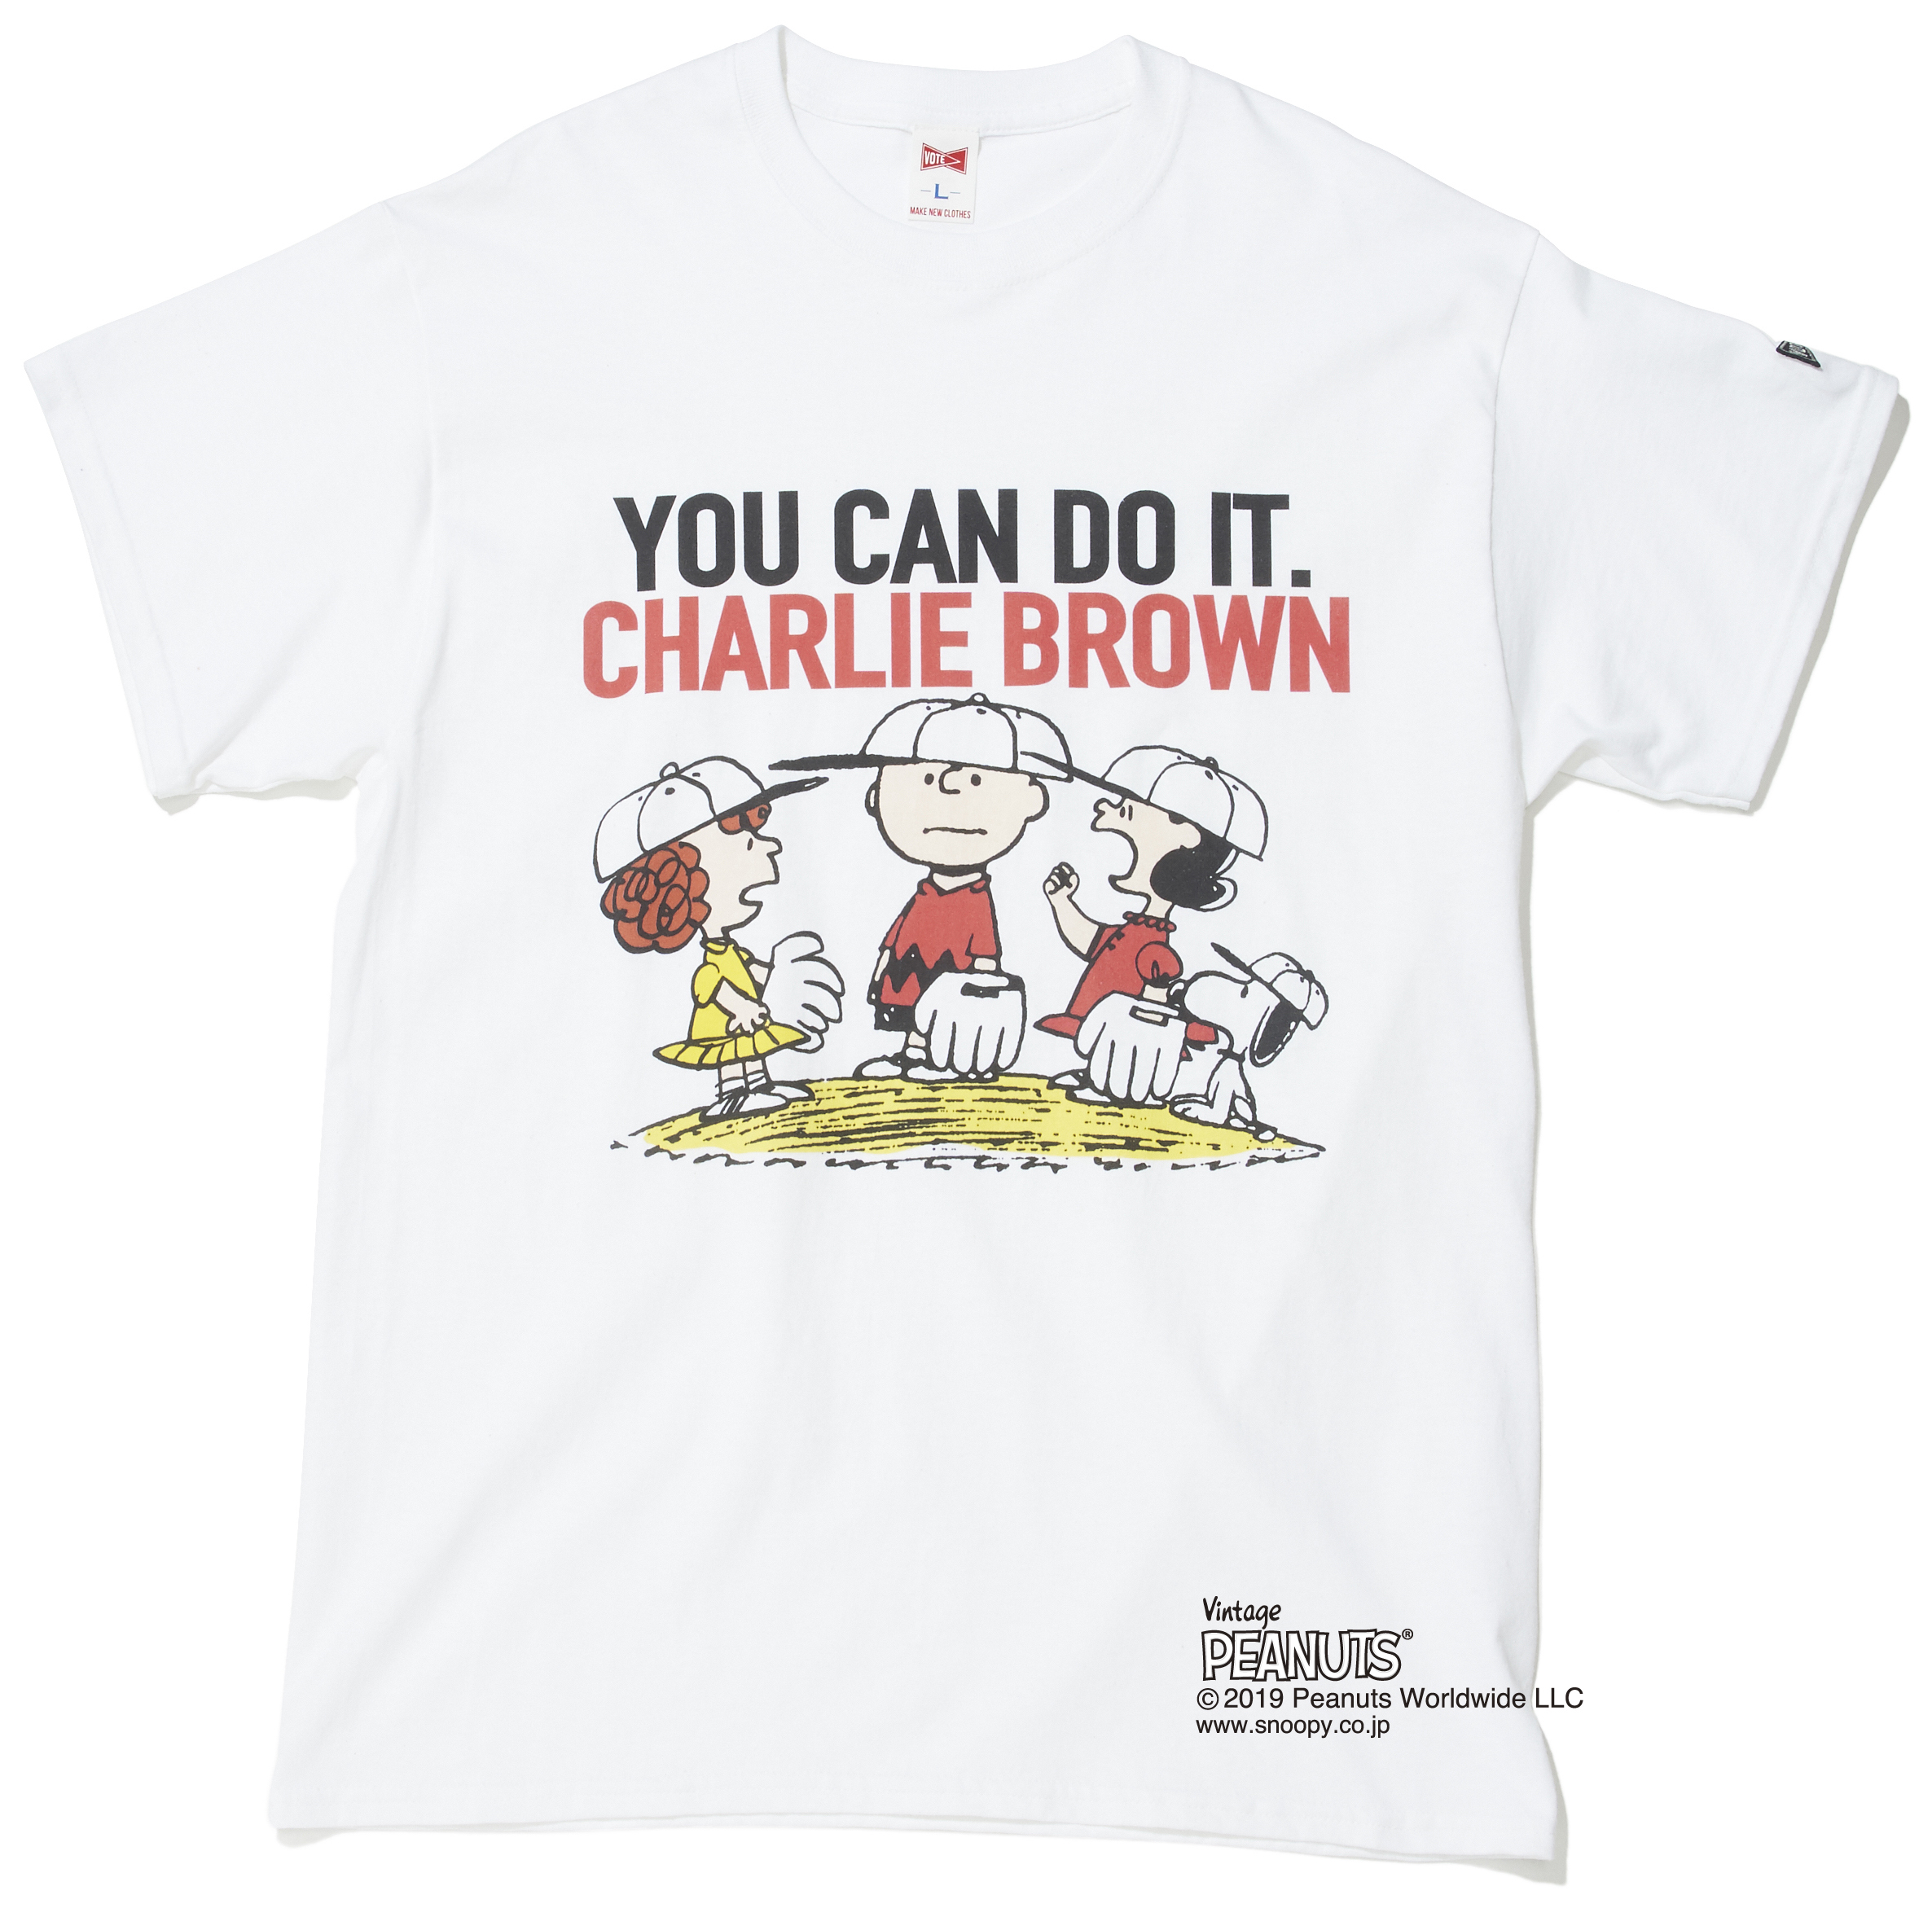 PEANUTS "YOU CAN DO IT" S/S TEE 